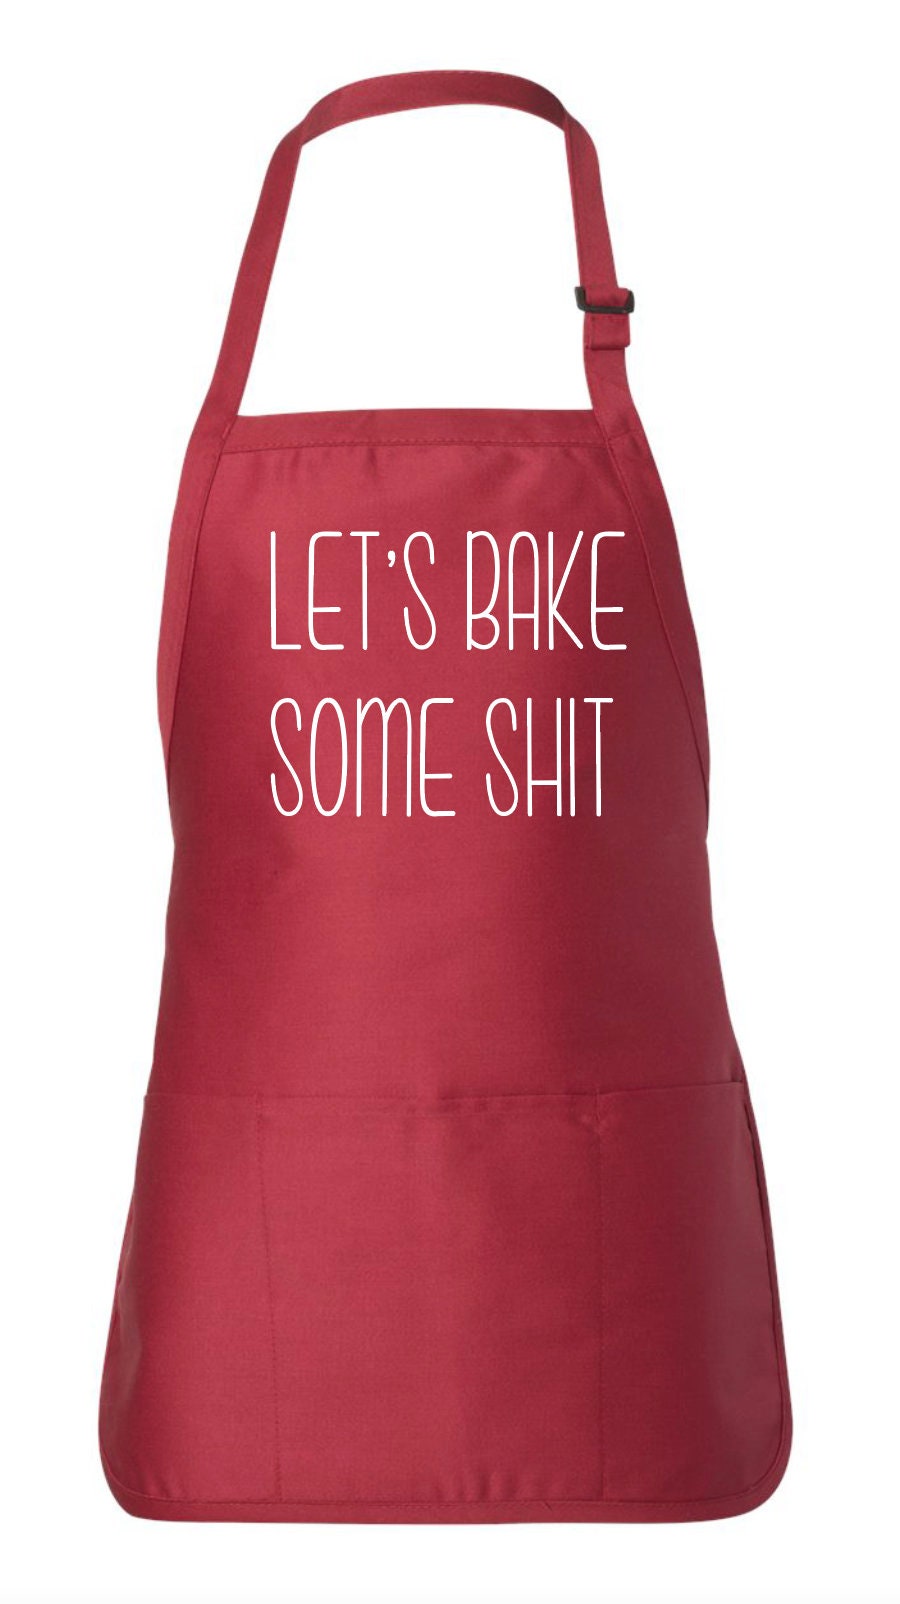 Shabba Stevo Clothing Funny BBQ Apron Novelty Aprons Cooking Gifts for